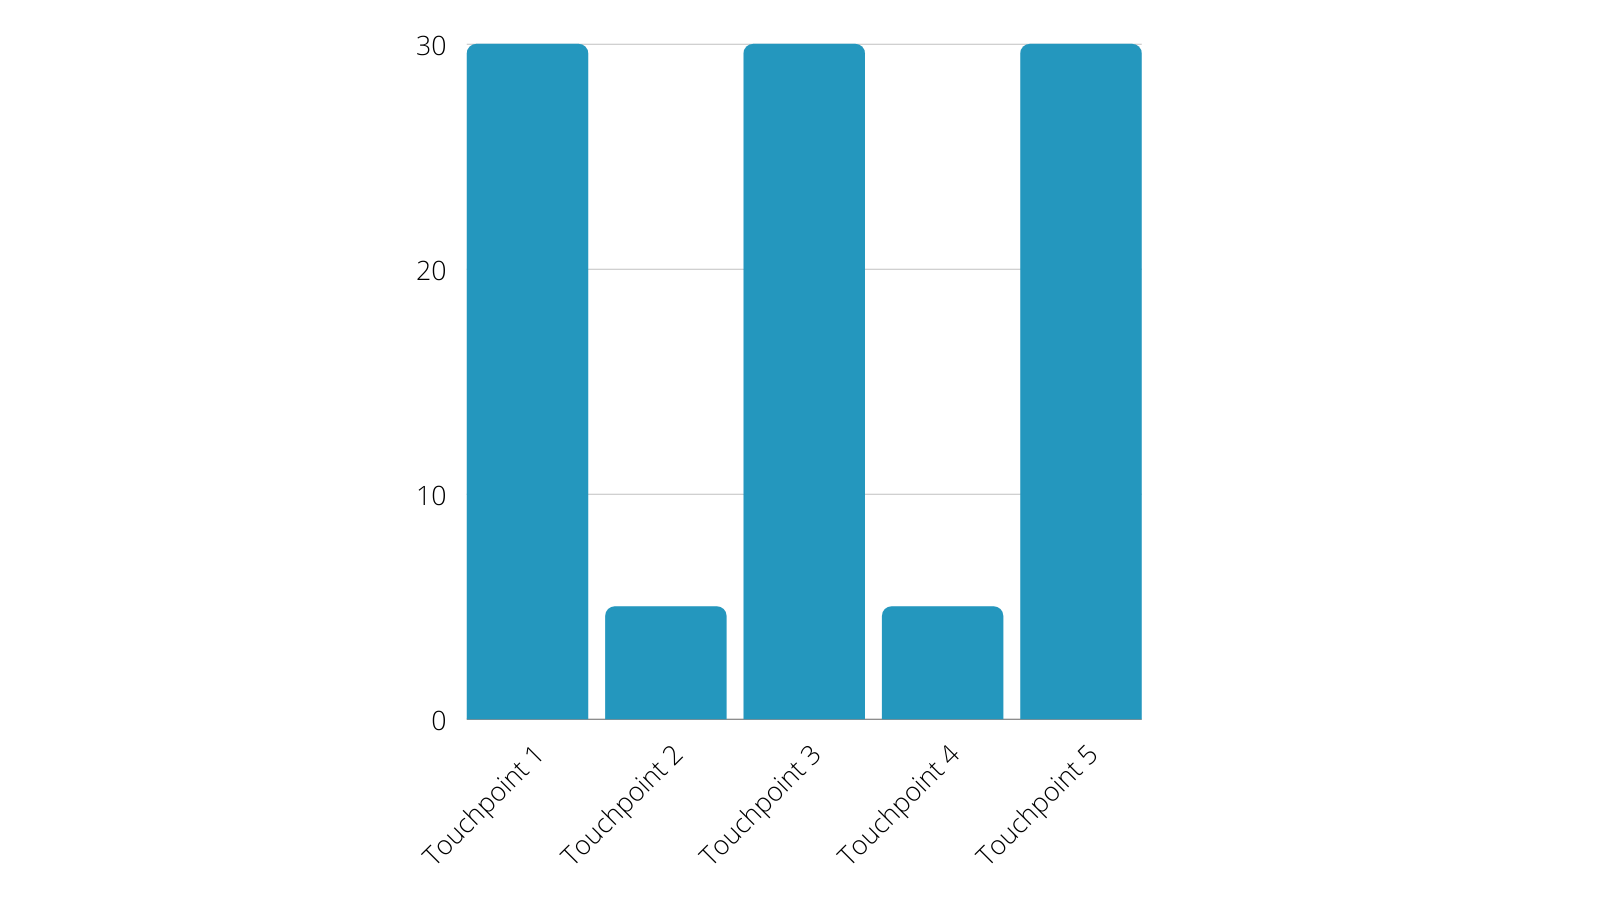 A bar graph with touchpoints 1, 3, and 5 at 30 and 2 and 4 at 5